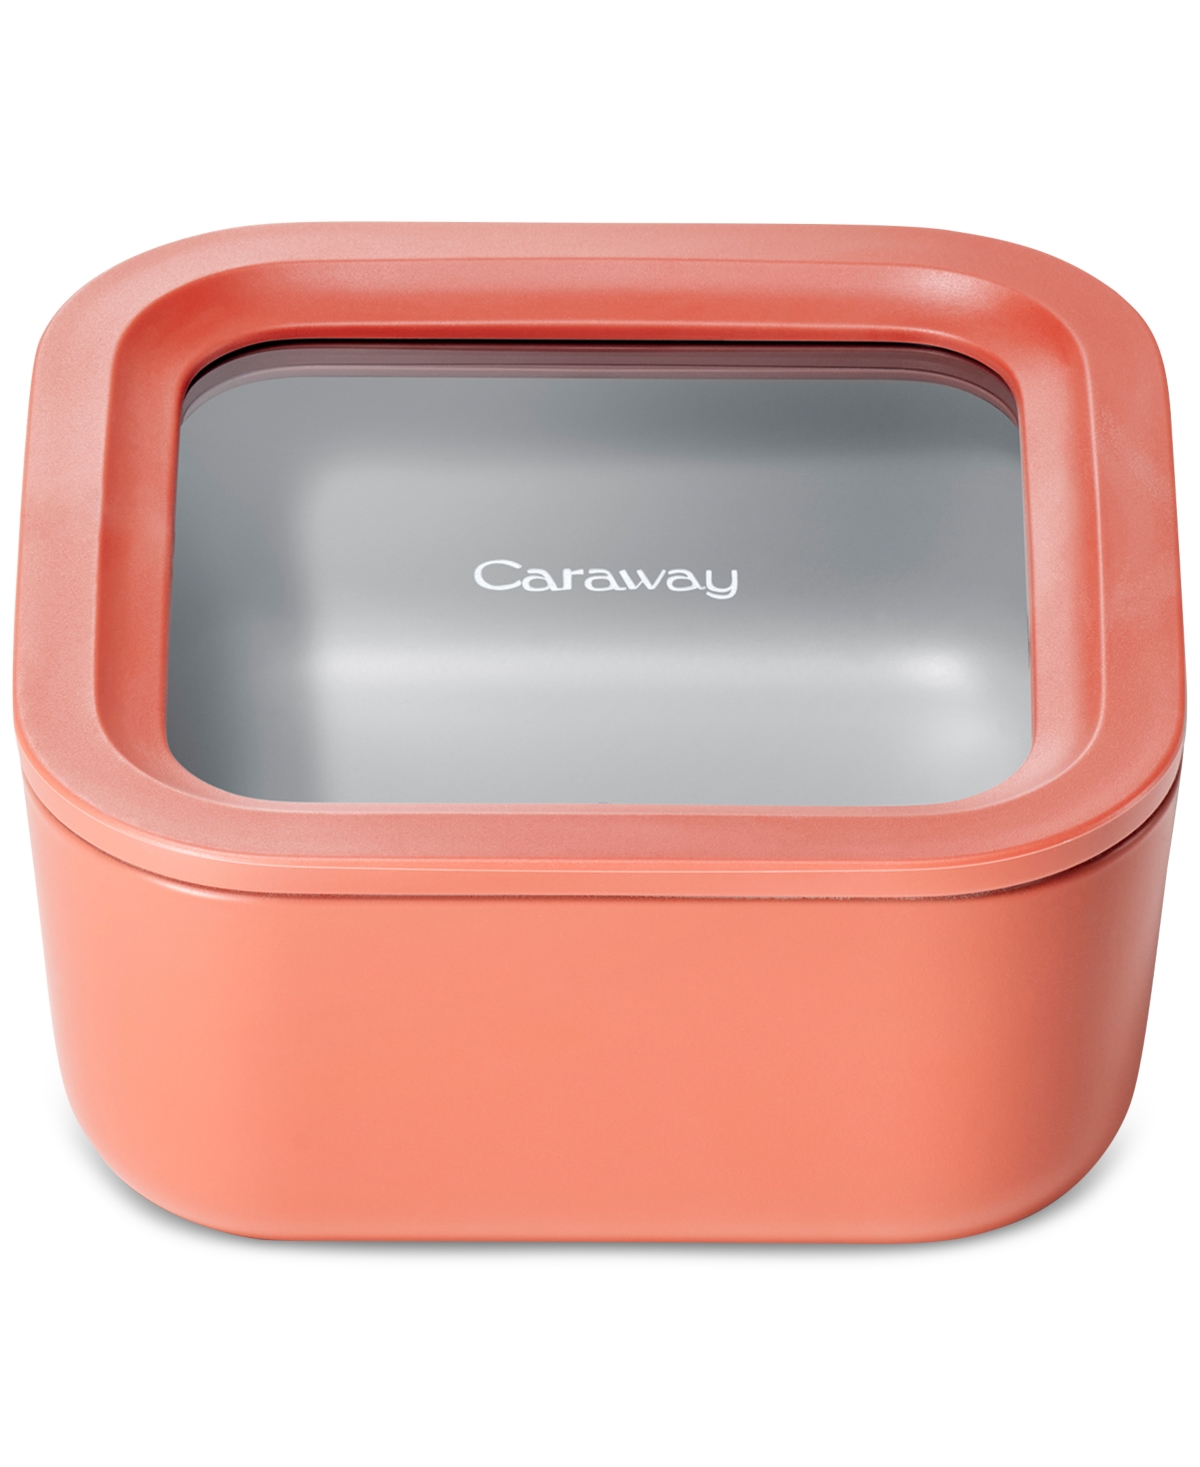 Shop Caraway 4.4-cup Square Glass Food Storage & Lid In Perracotta